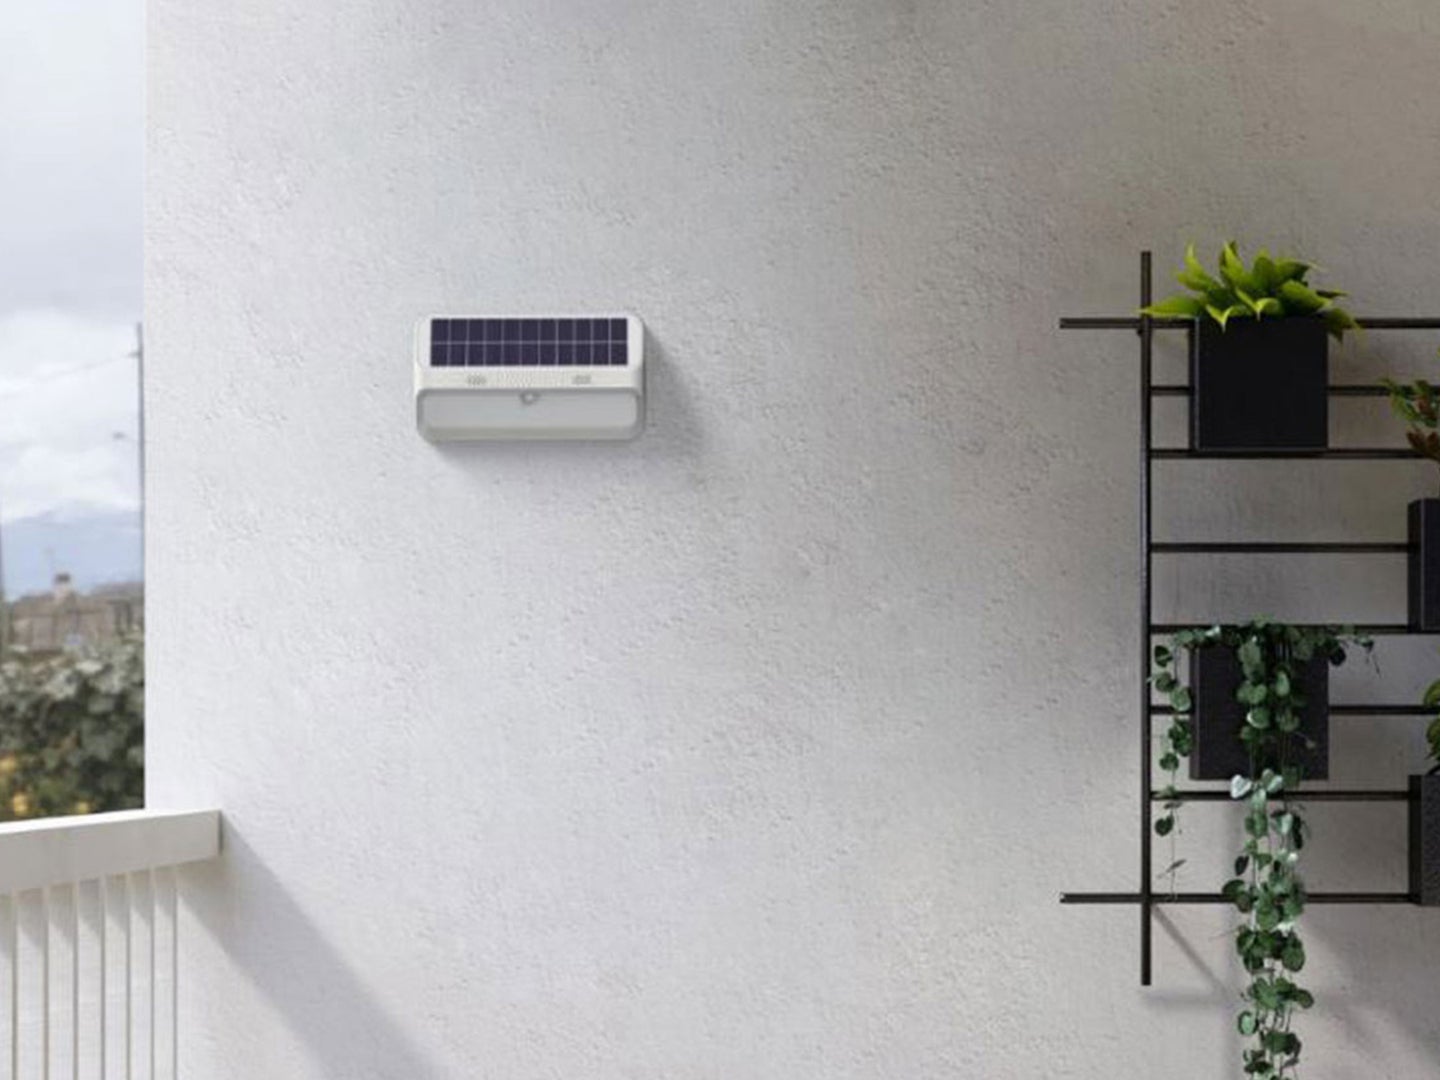 An outdoor solar charging light mounted on a wall